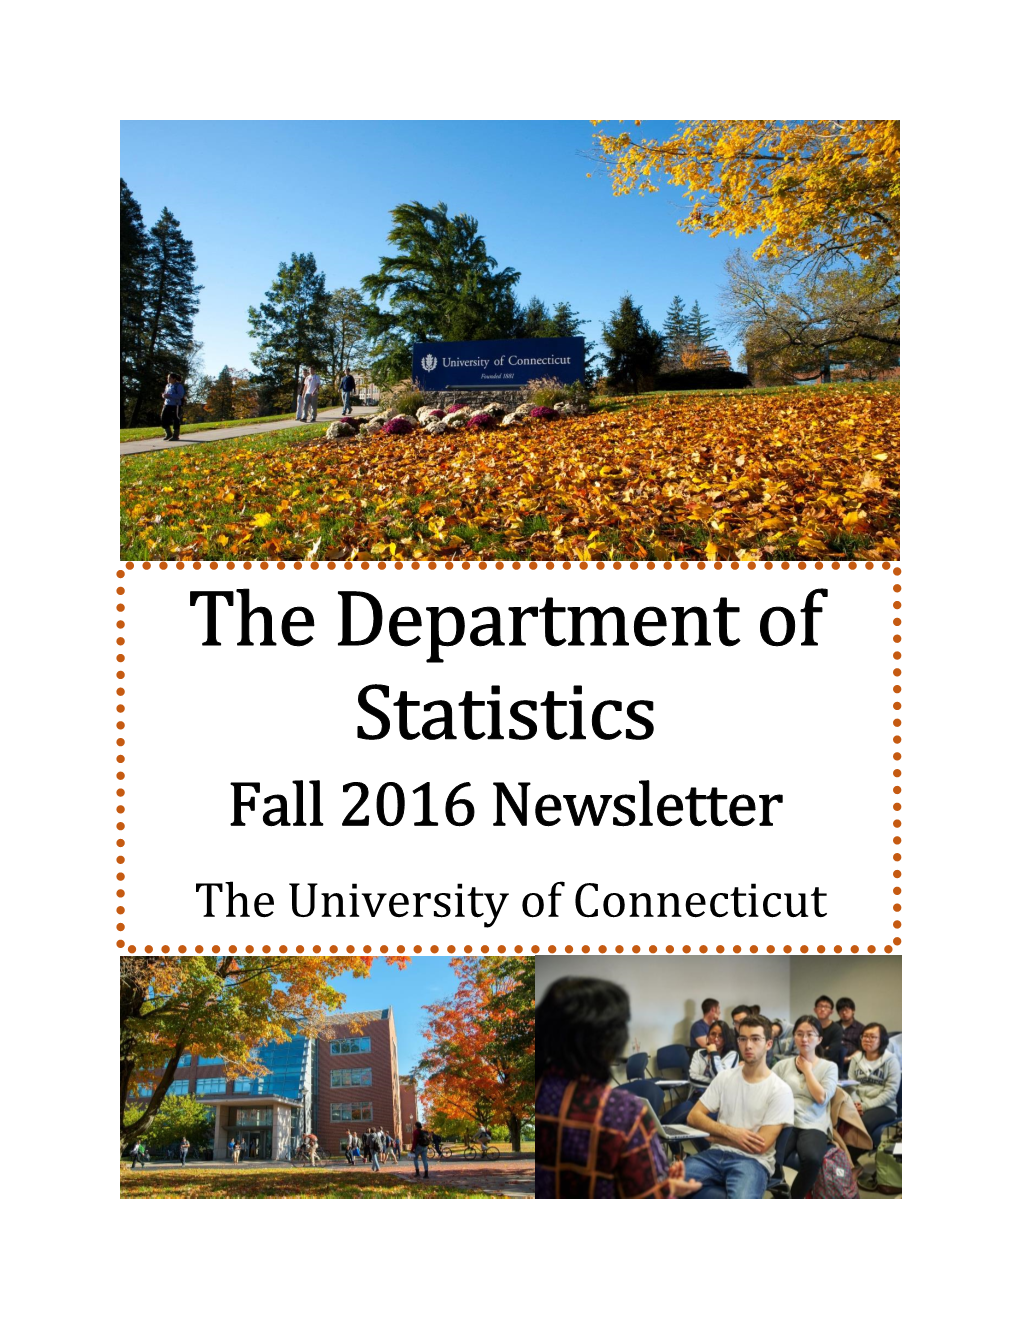 The Department of Statistics Fall 2016 Newsletter the University of Connecticut